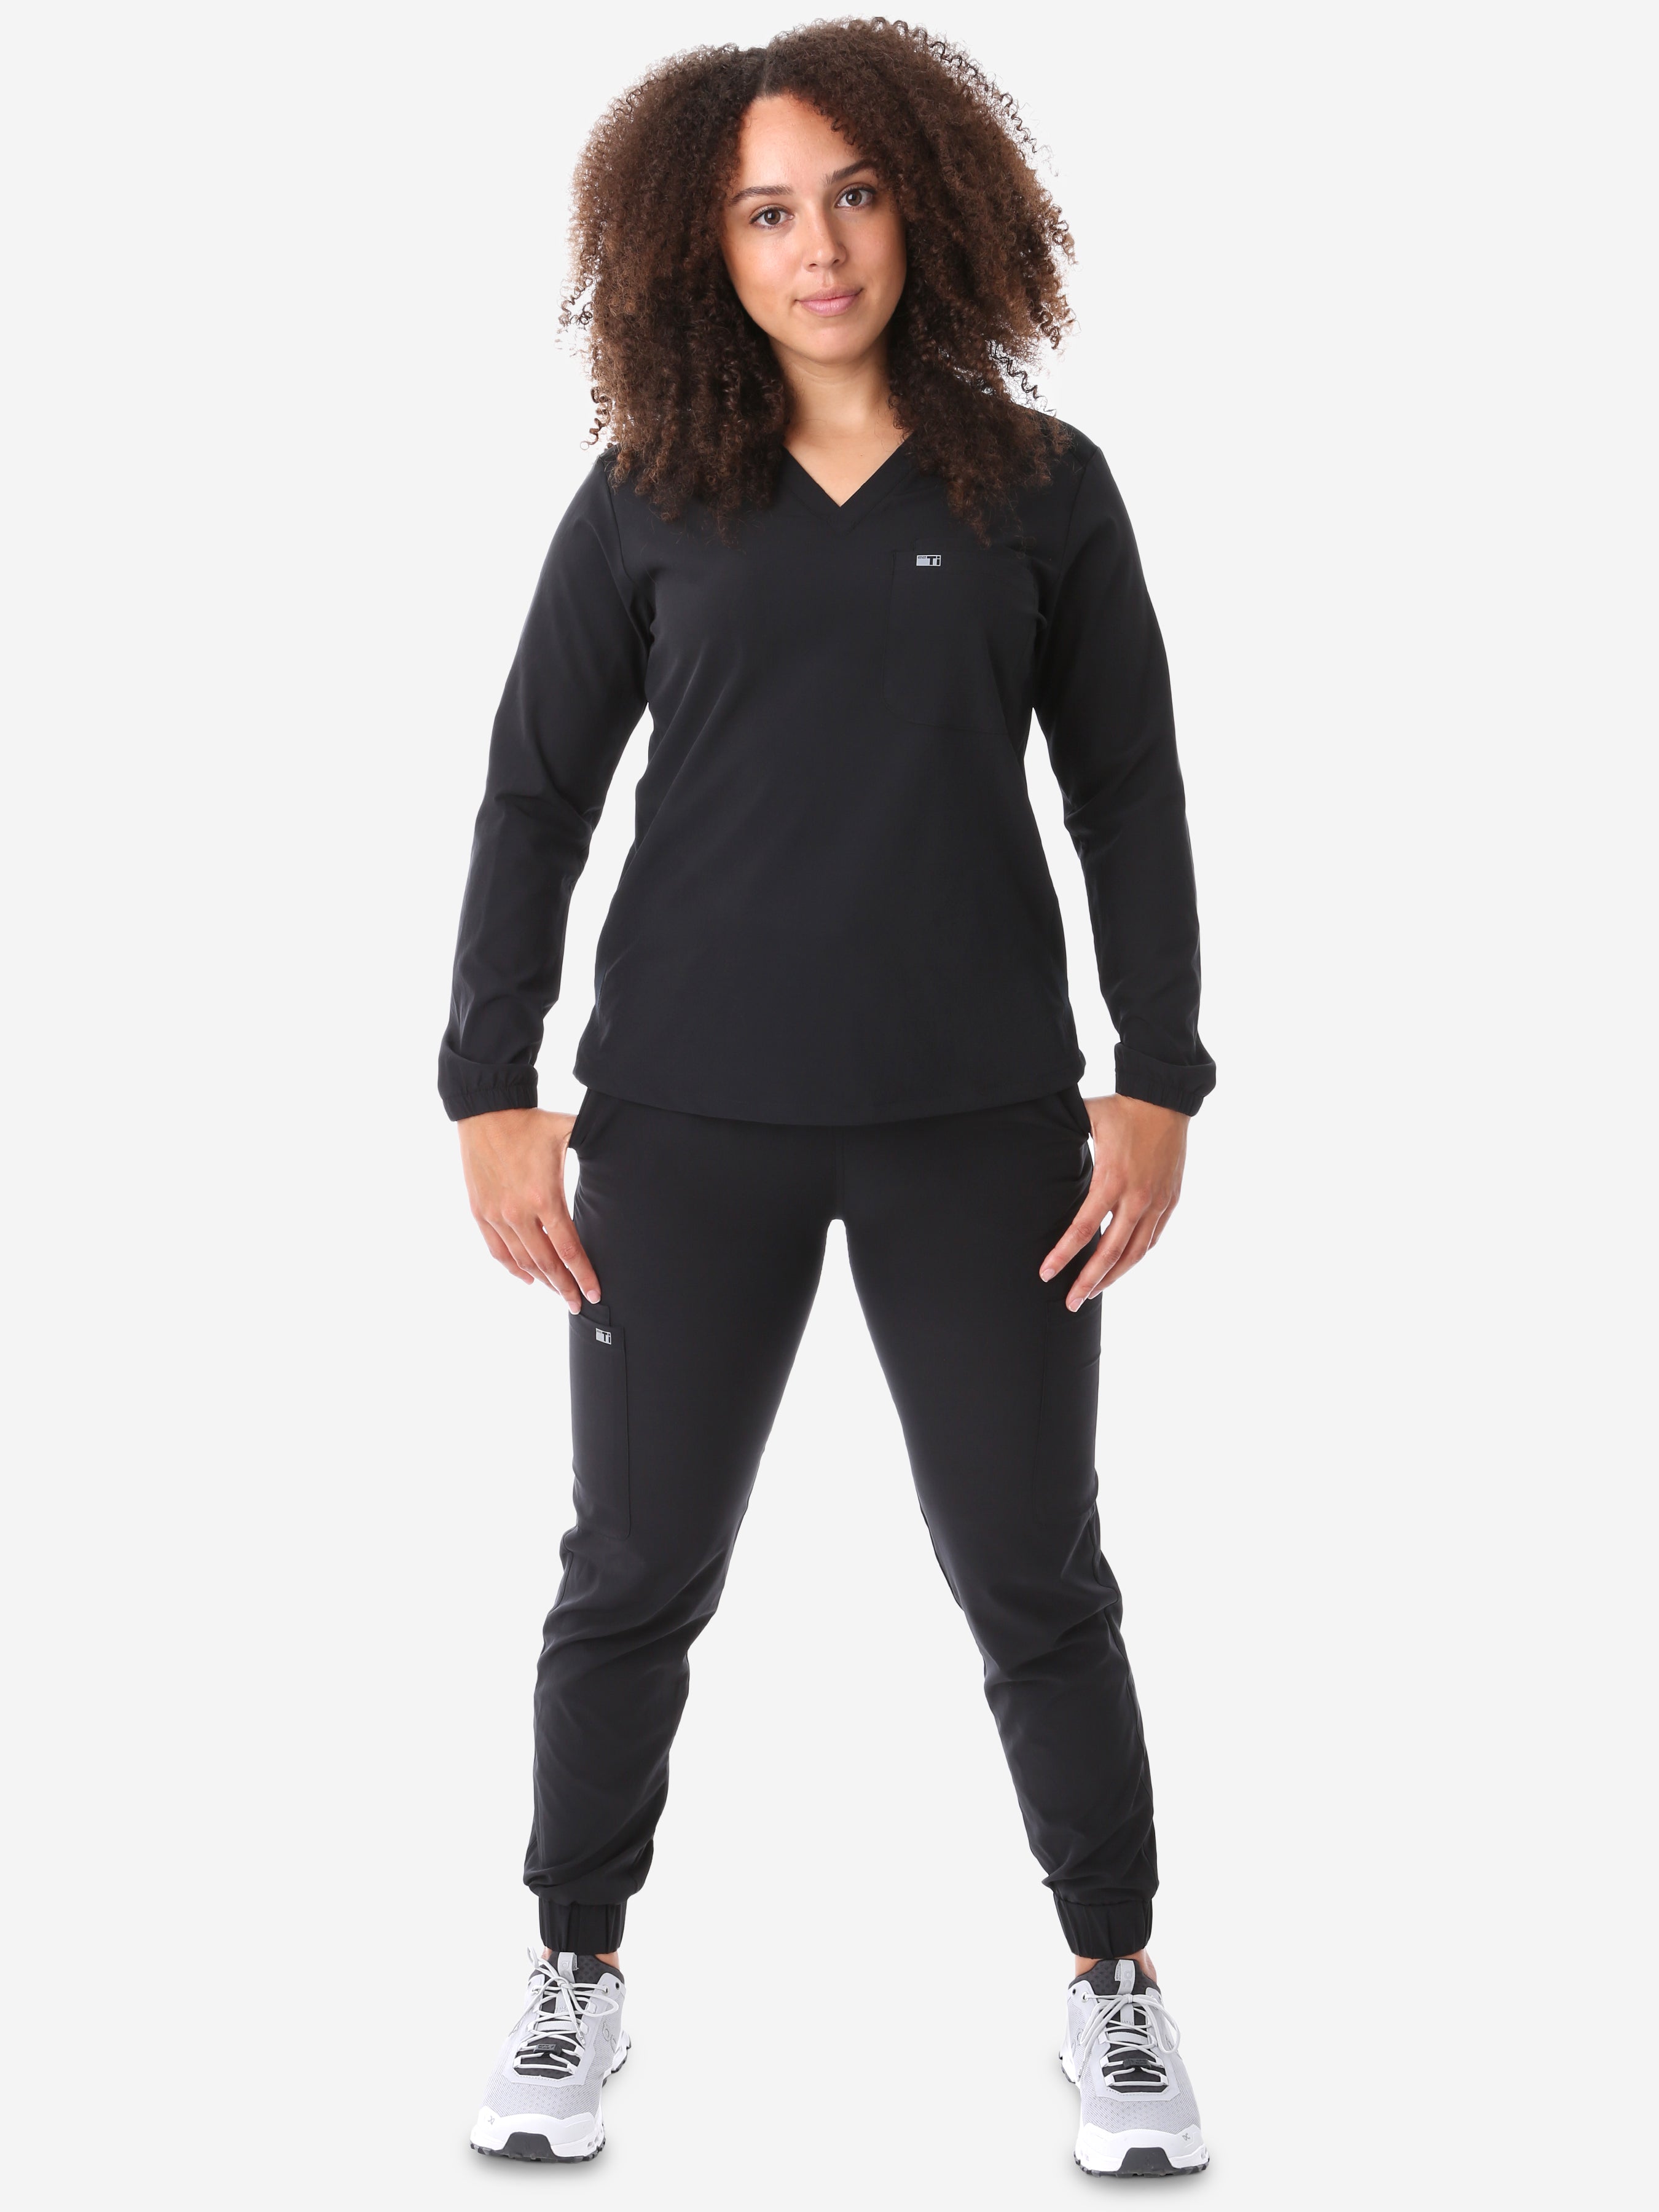 Women's Real Black Long-Sleeve Scrub Untucked Full Body Front View with Perfect Joggers